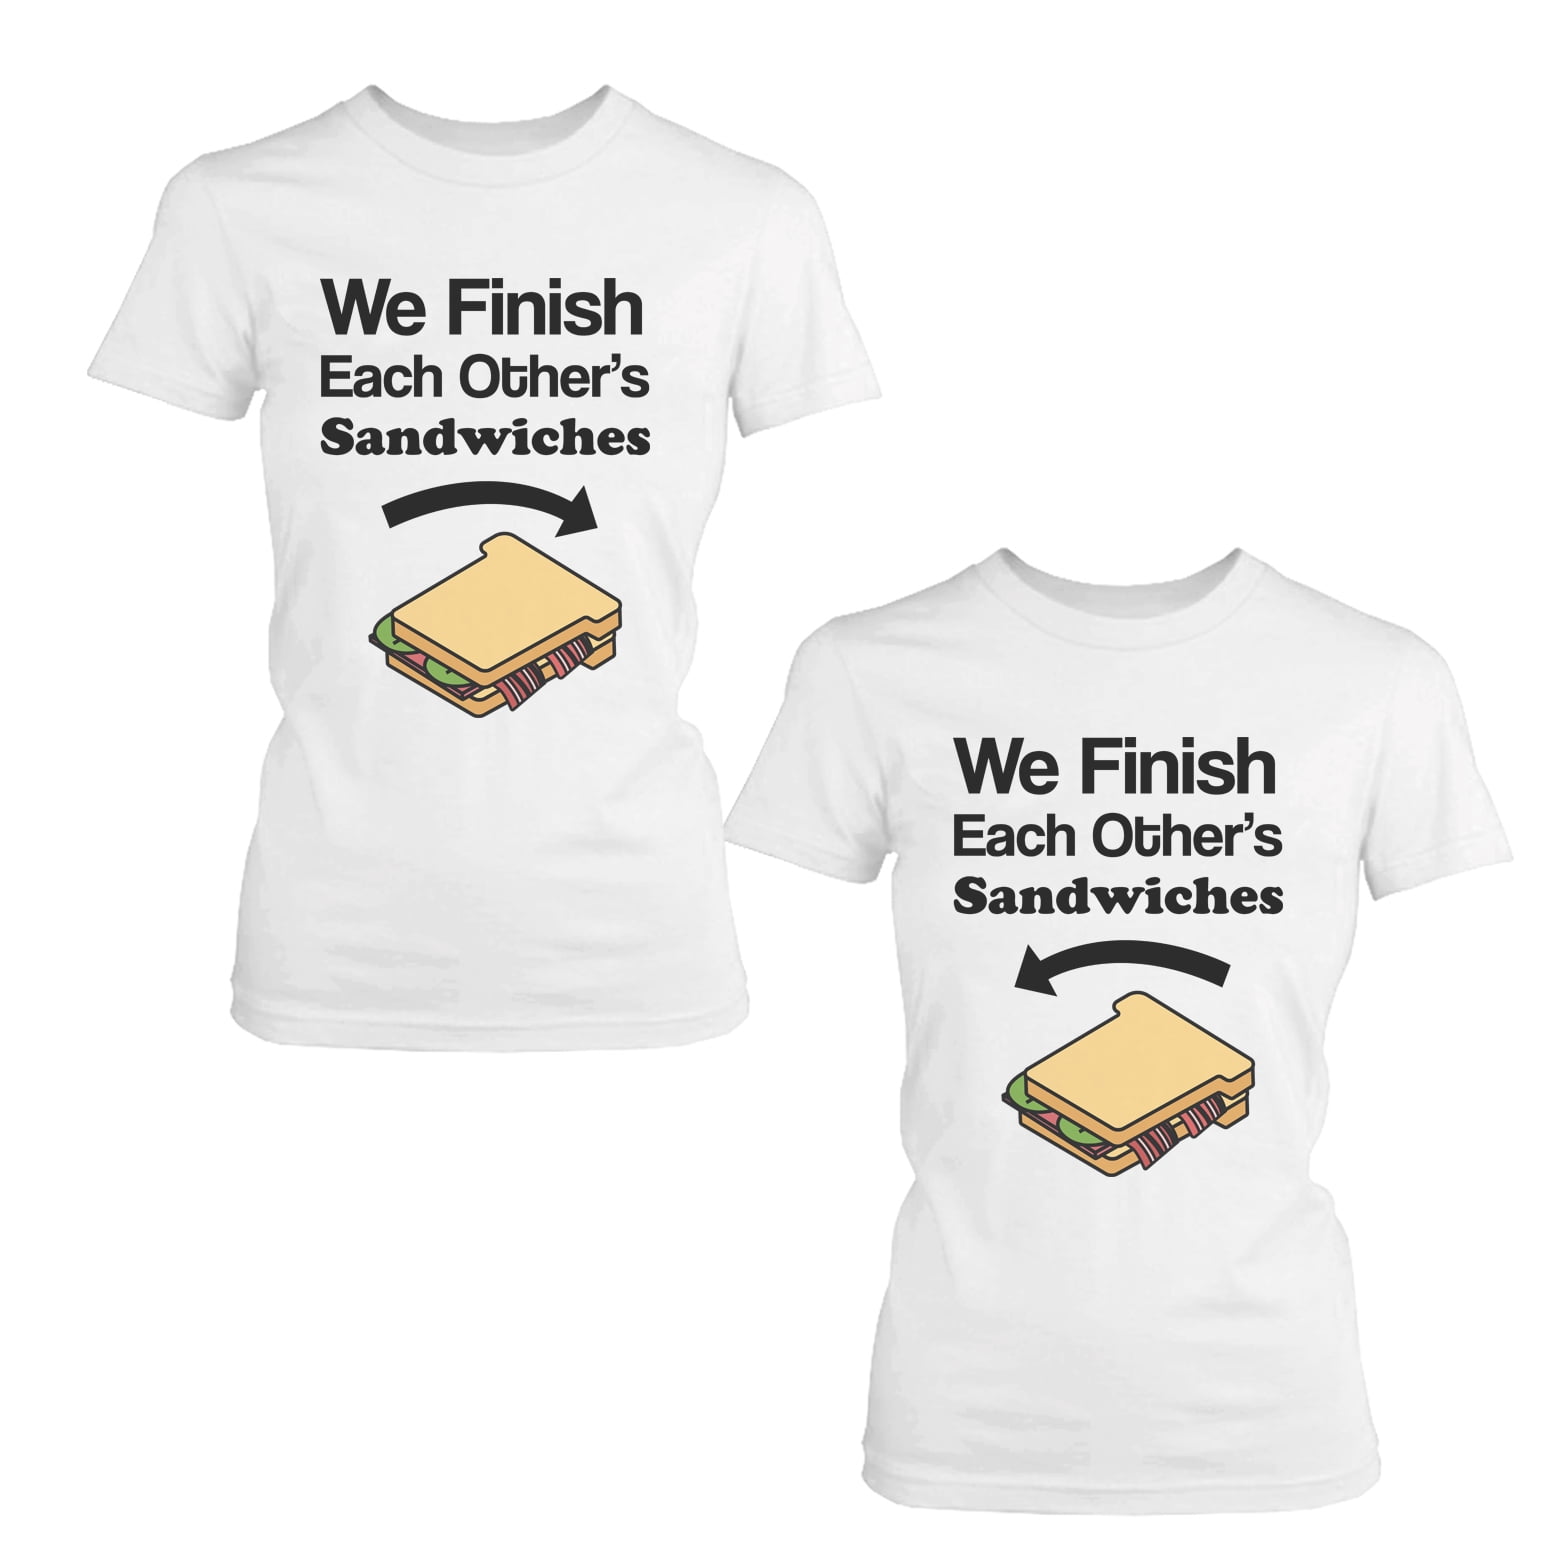 We Finish Each Others Sandwiches Shirt Mr and Mrs Family Shirts Best Friends B-06072129 Matching Shirts Couple Shirts His and Hers